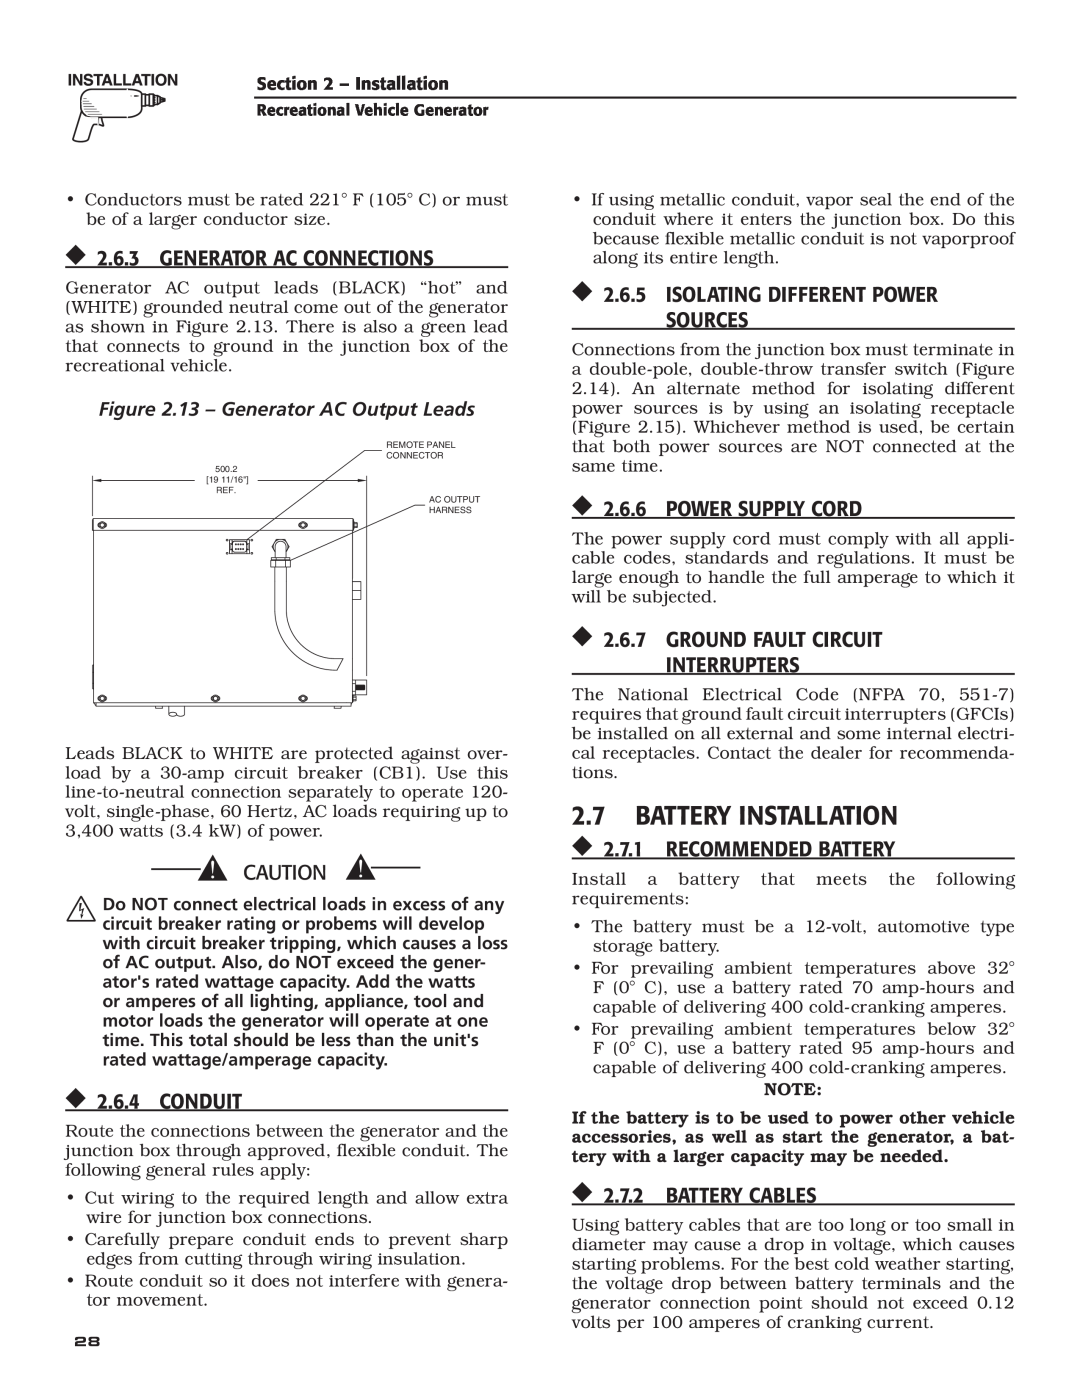 Guardian Technologies 004701-0 owner manual 2.6.3 GENERATOR AC CONNECTIONS, 2.6.6 POWER SUPPLY CORD, 2.6.4 CONDUIT 